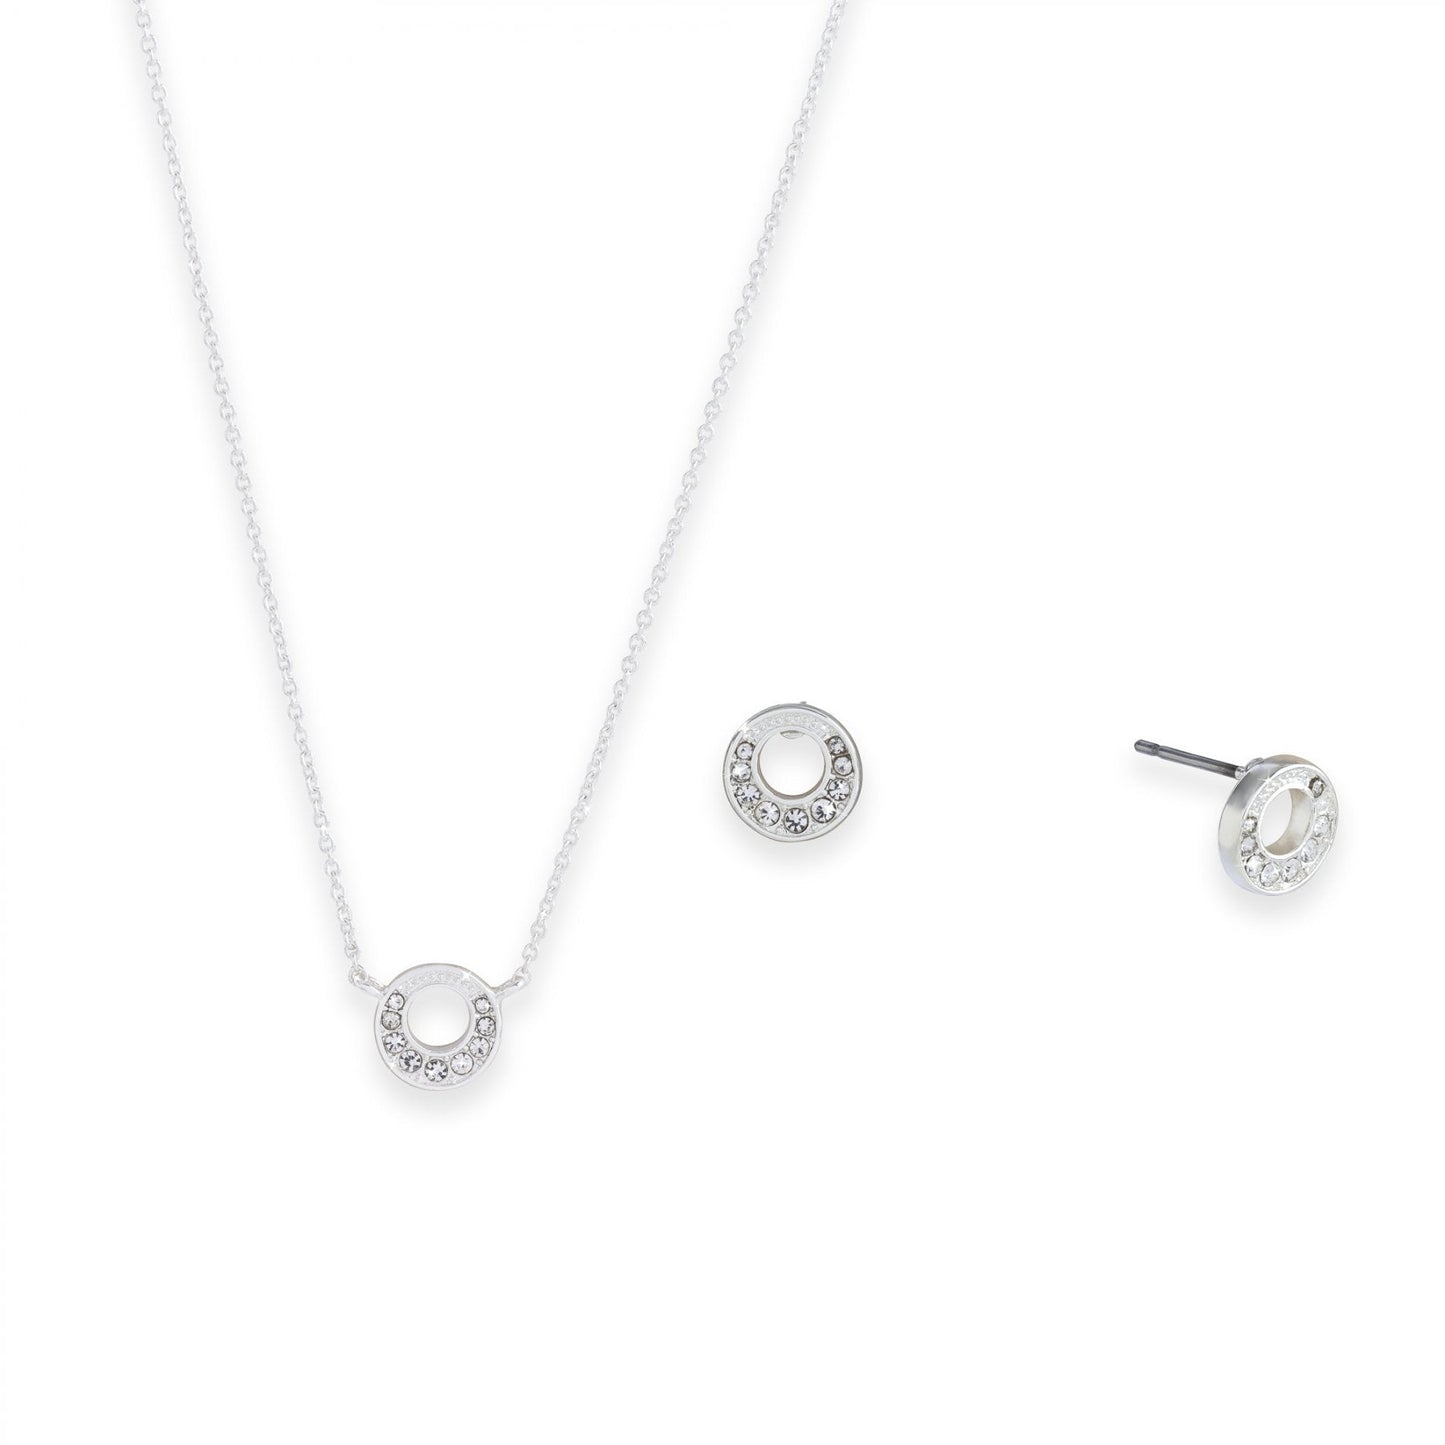 Circle Crystal Necklace and Earrings Set